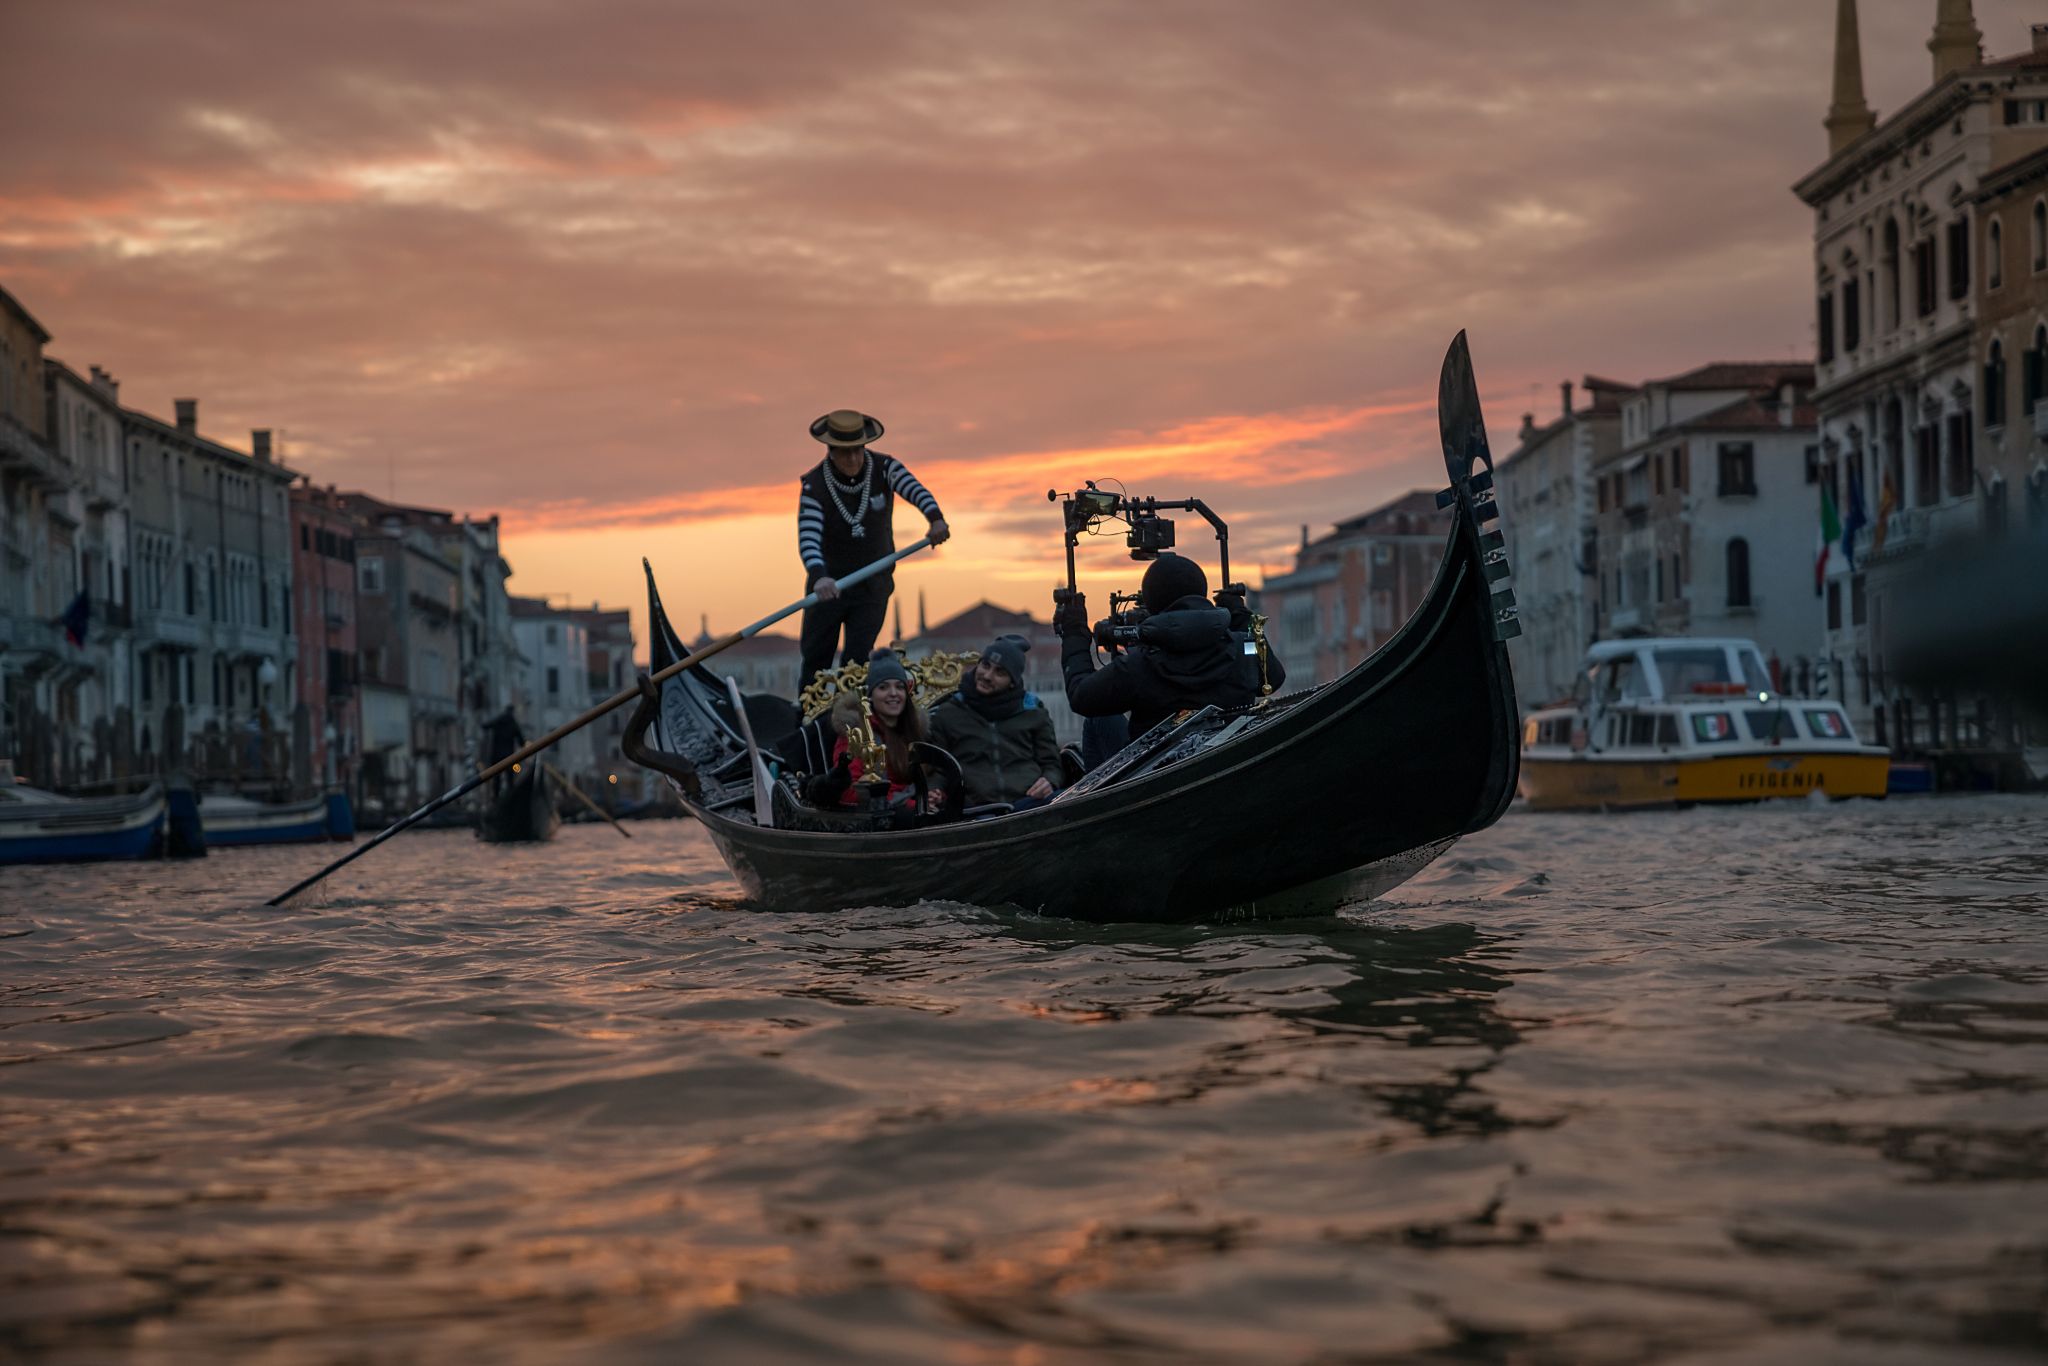 Shooting on a gondola at sunset